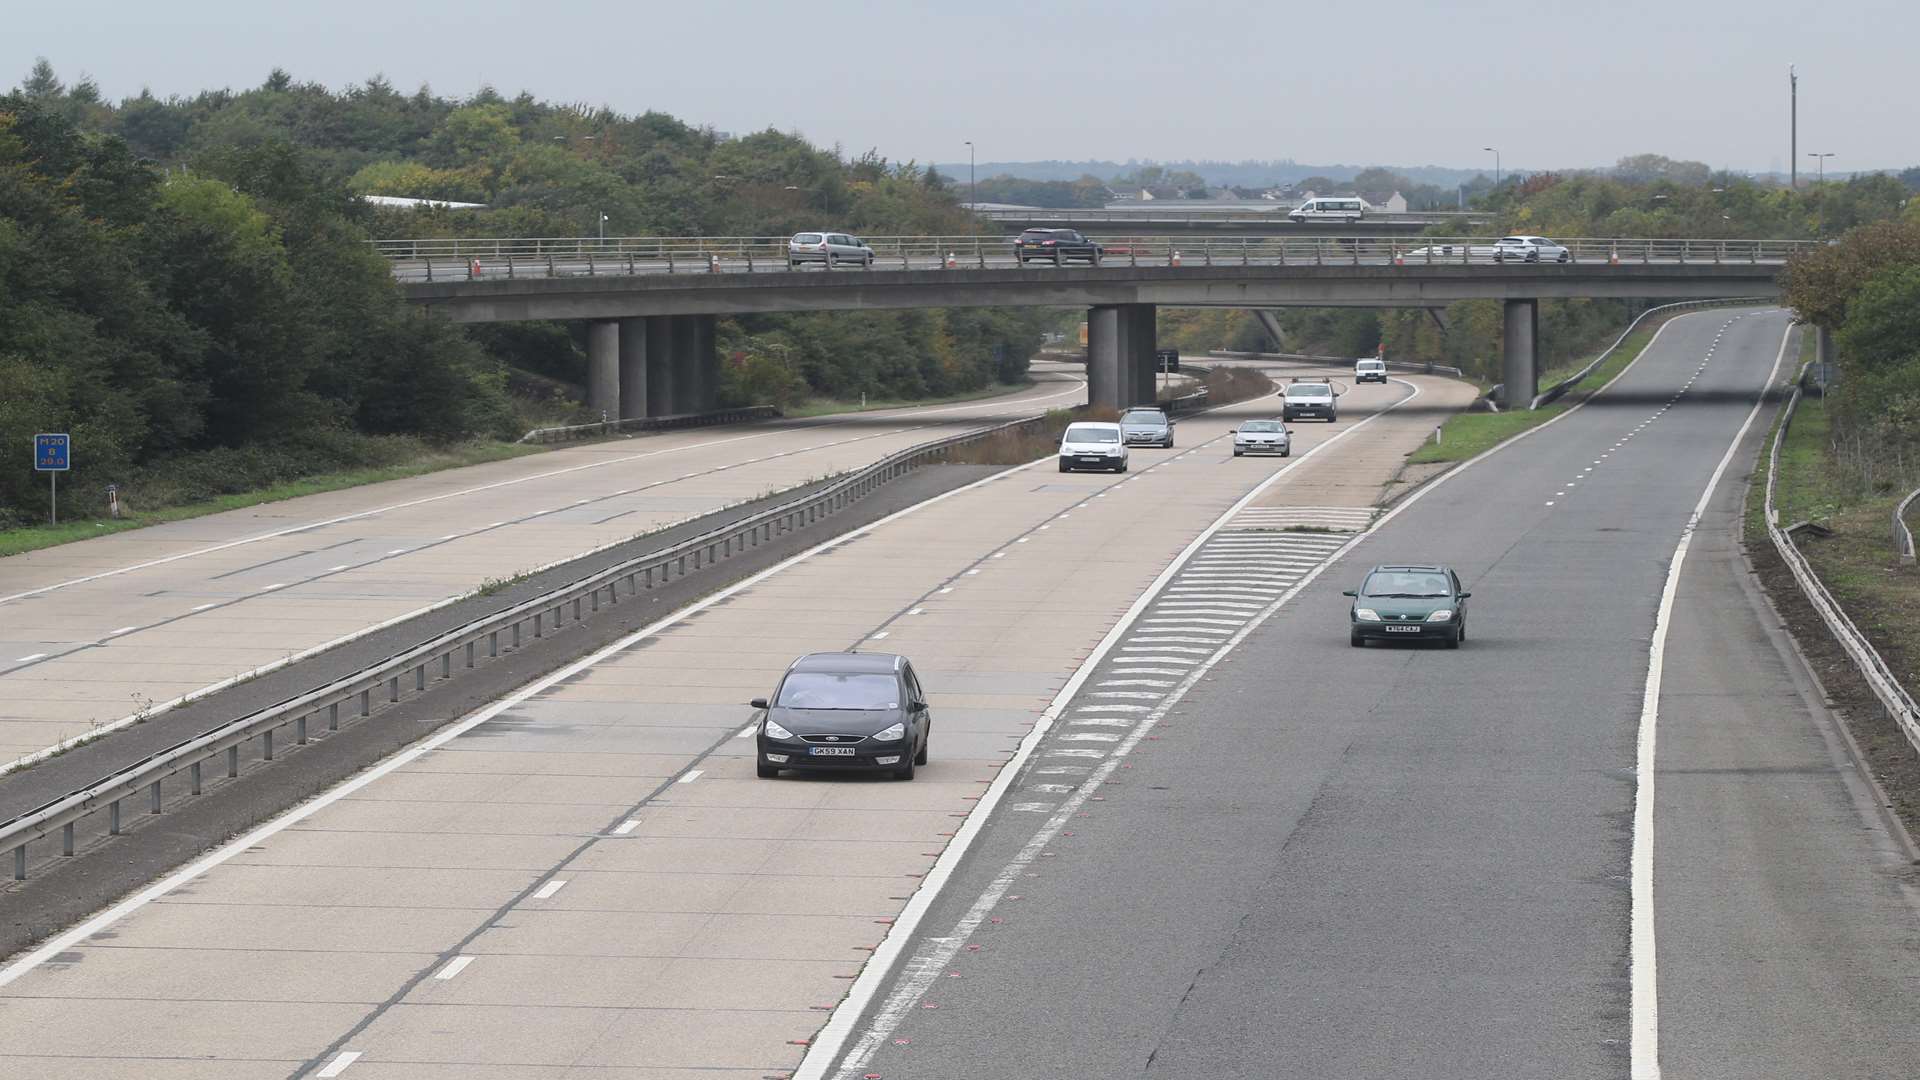 Police searched a stretch of the M20 between junctions 1 and 2